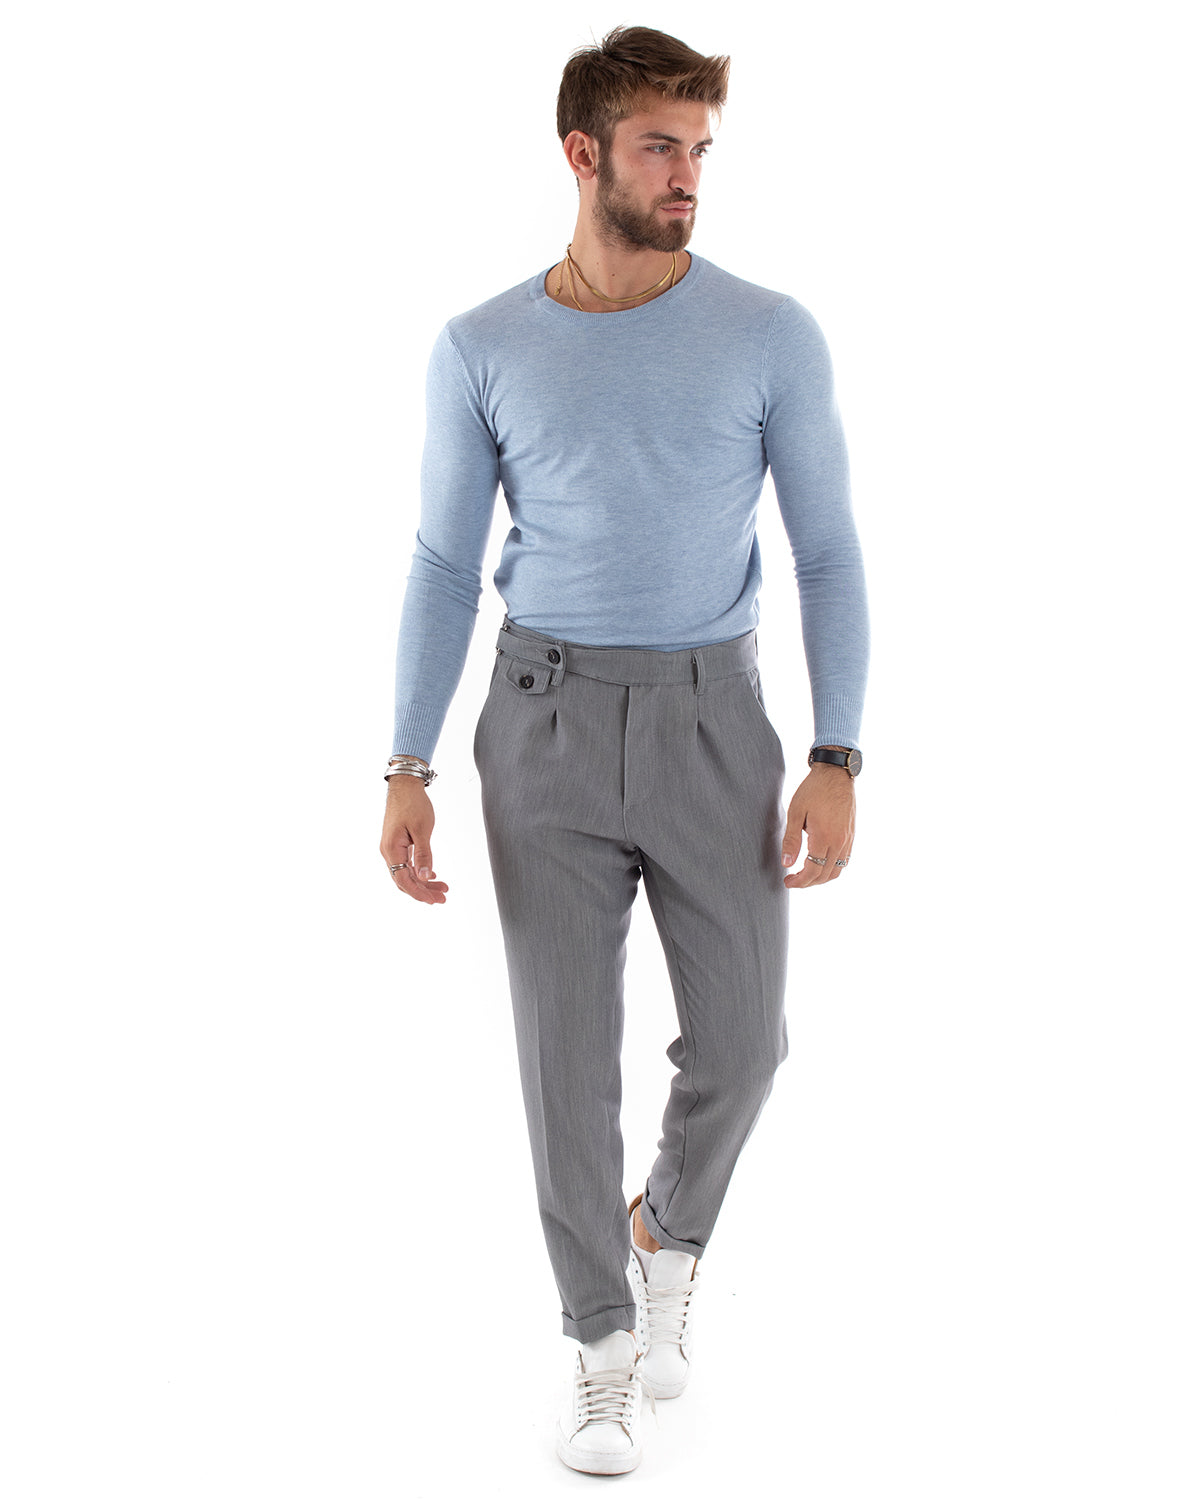 Men's Casual Crew Neck Solid Color Long Sleeve Powder Sweater GIOSAL M2570A